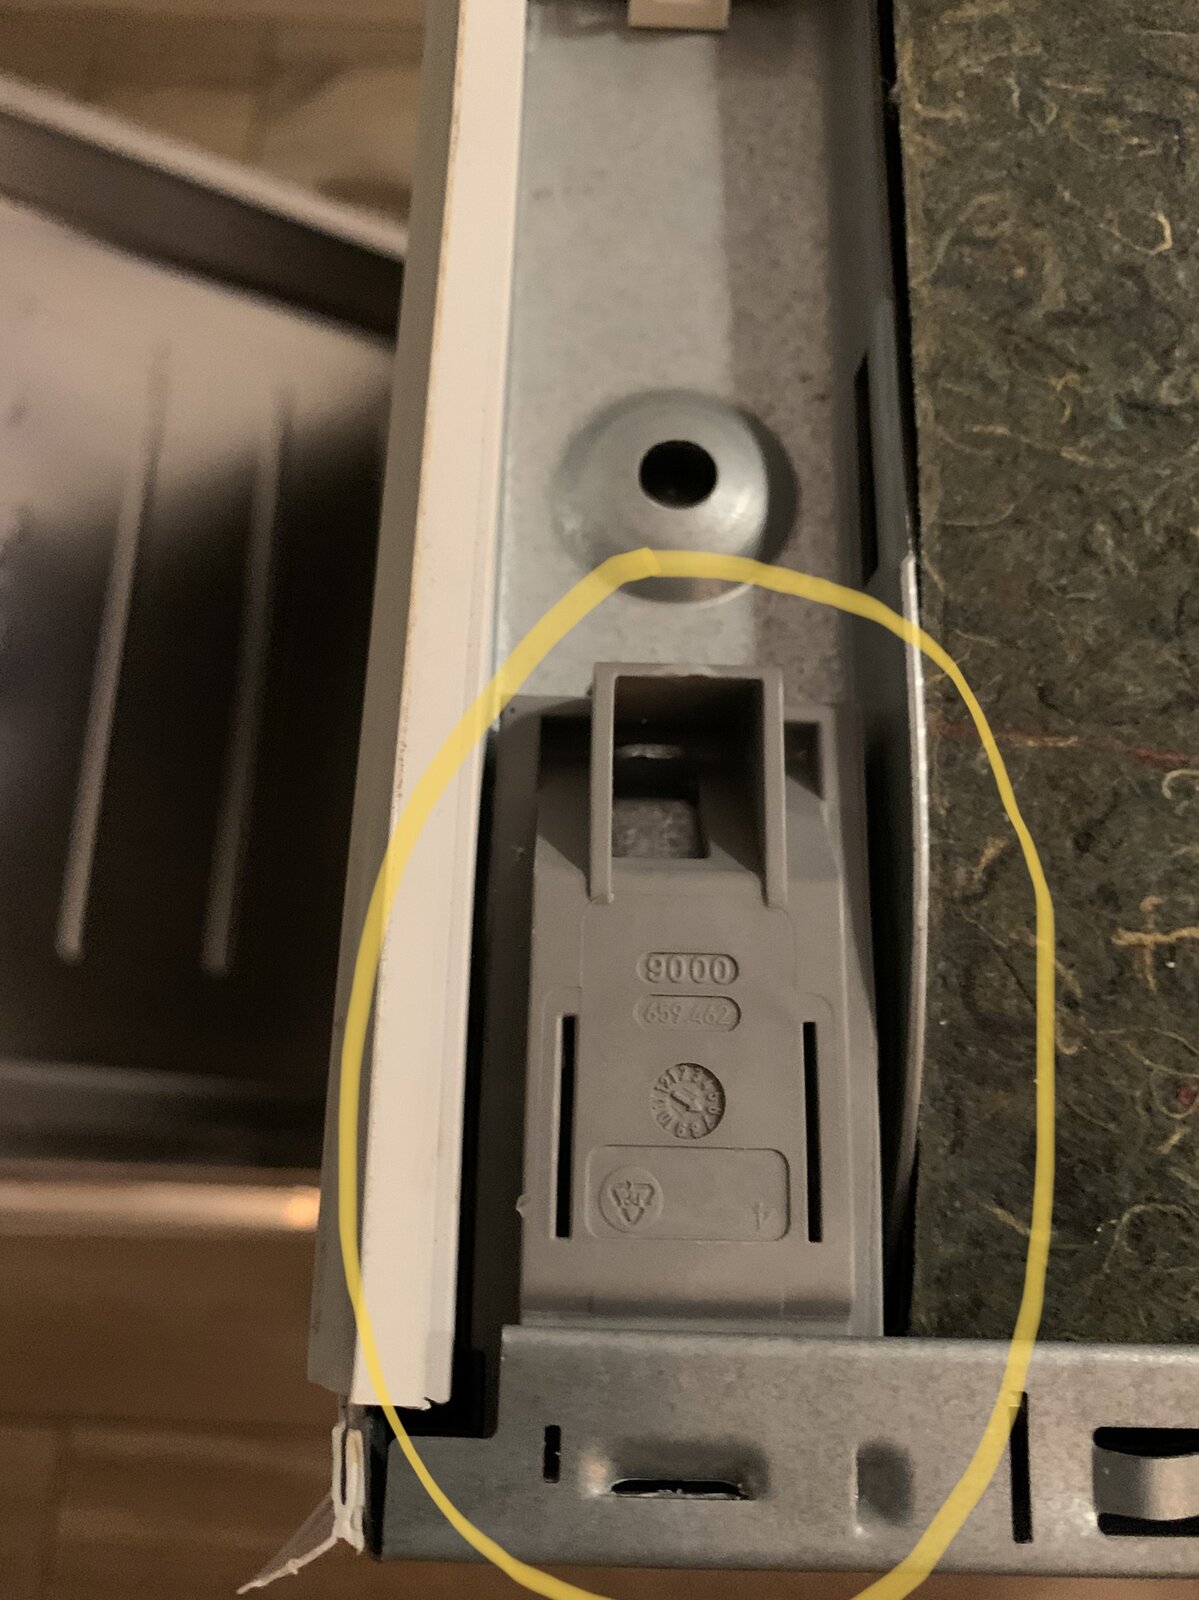 Integrated Dishwasher Side Panel/Hinge Replacement | DIYnot Forums